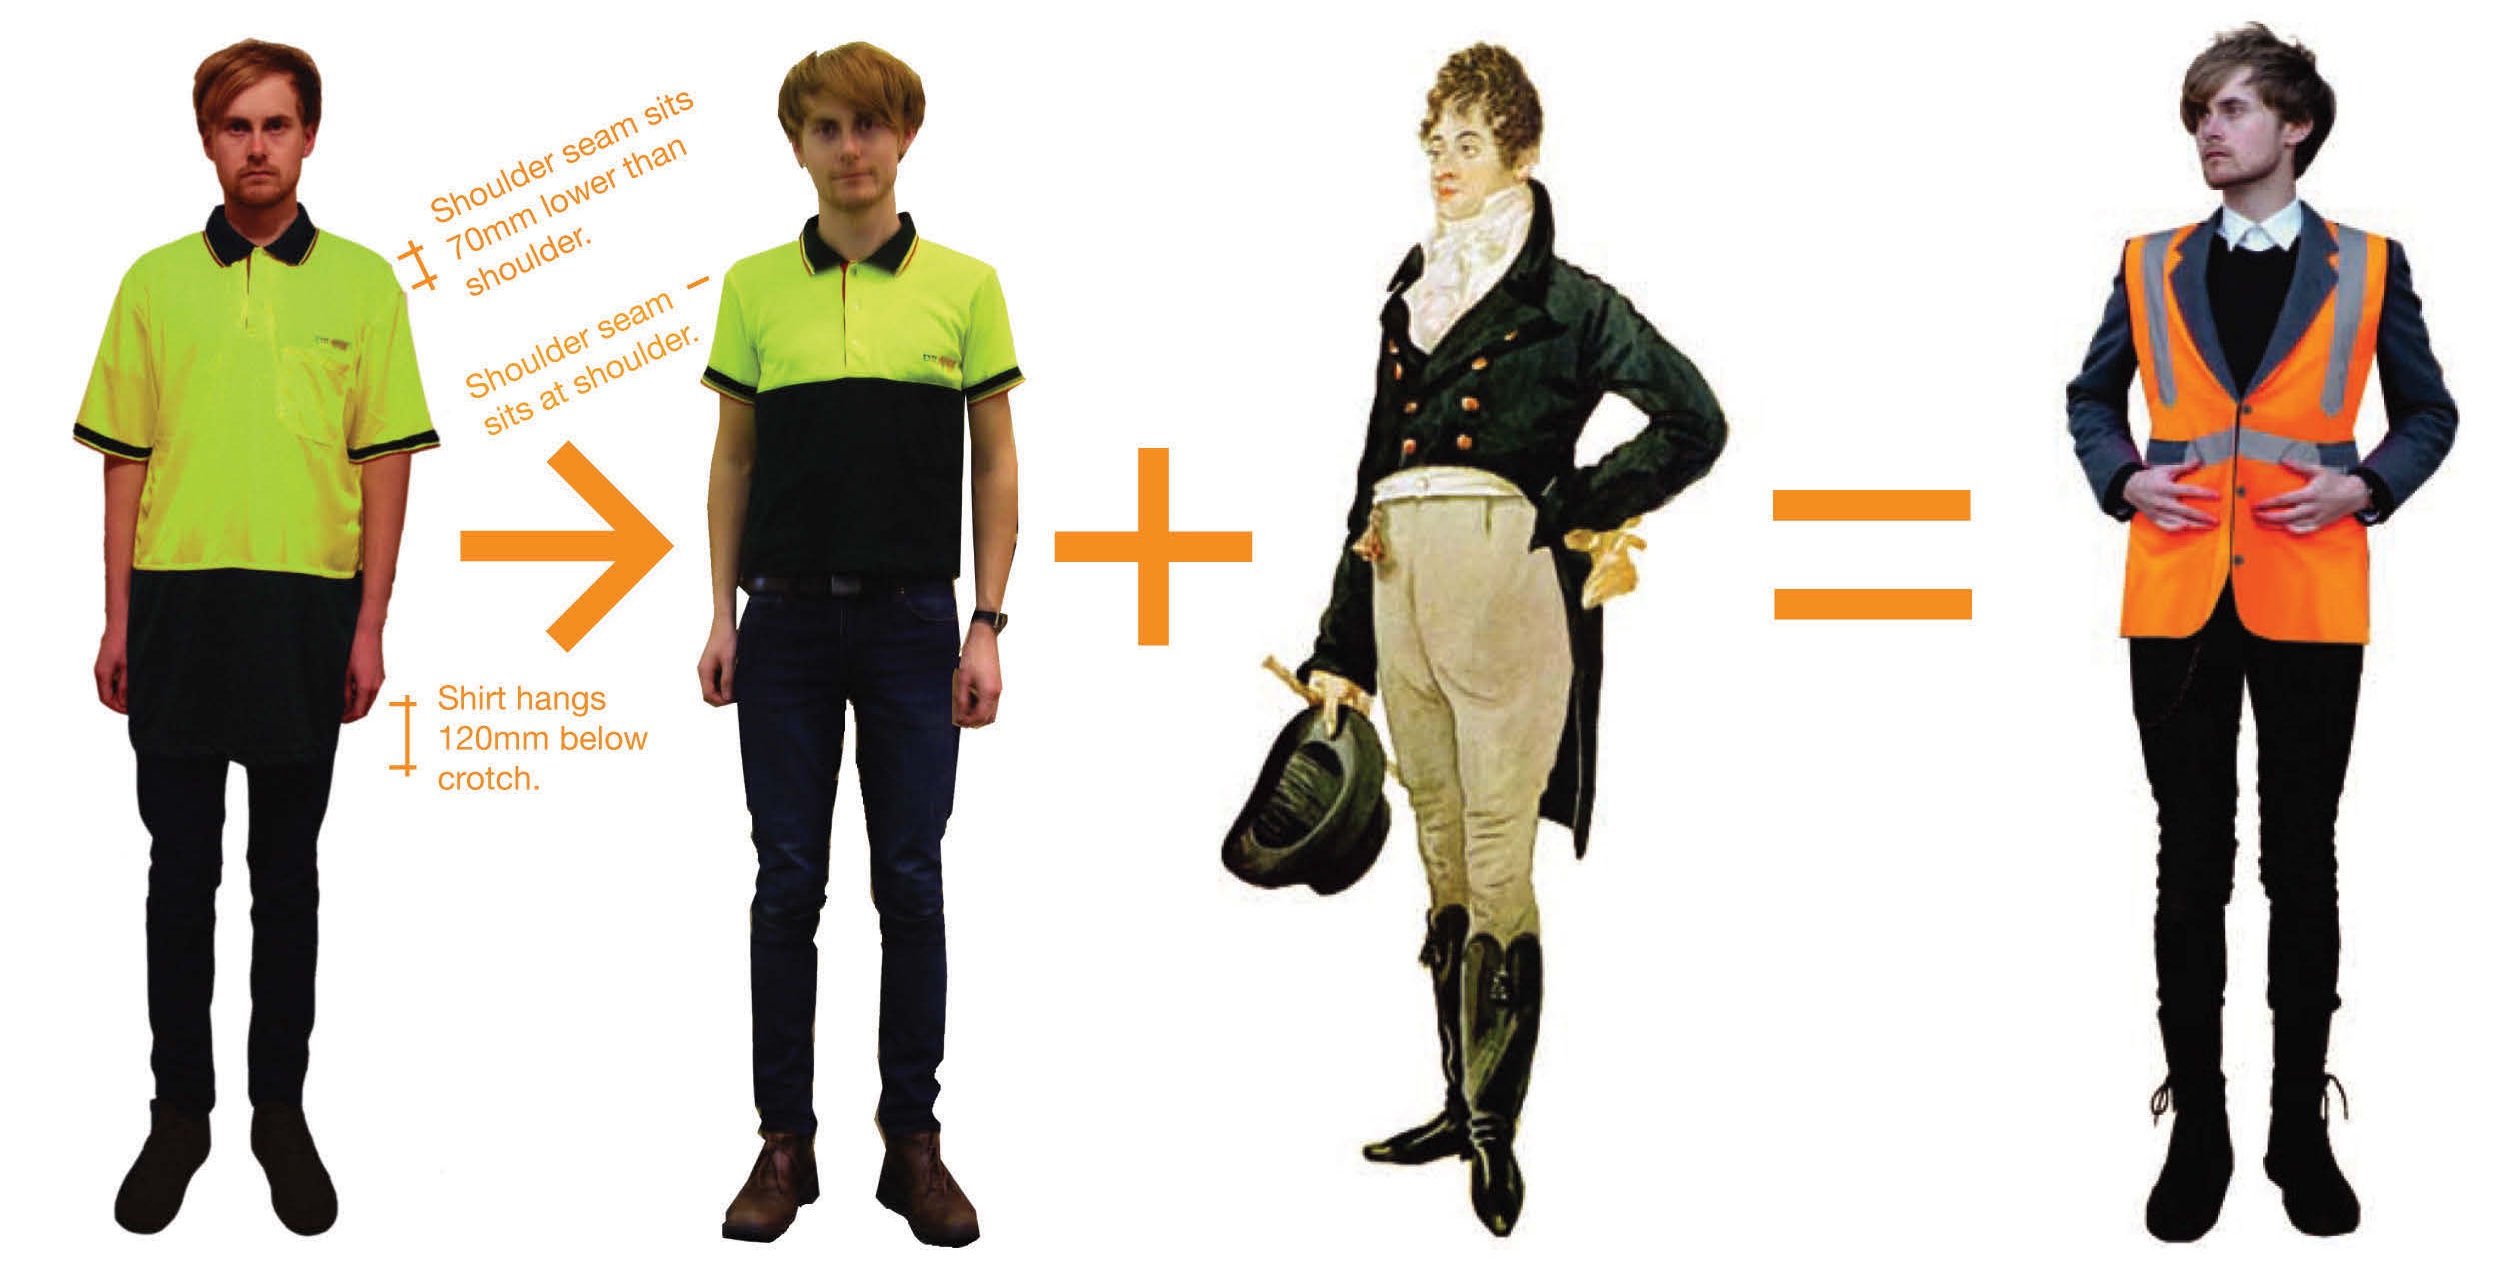 The high-vis tailoring process